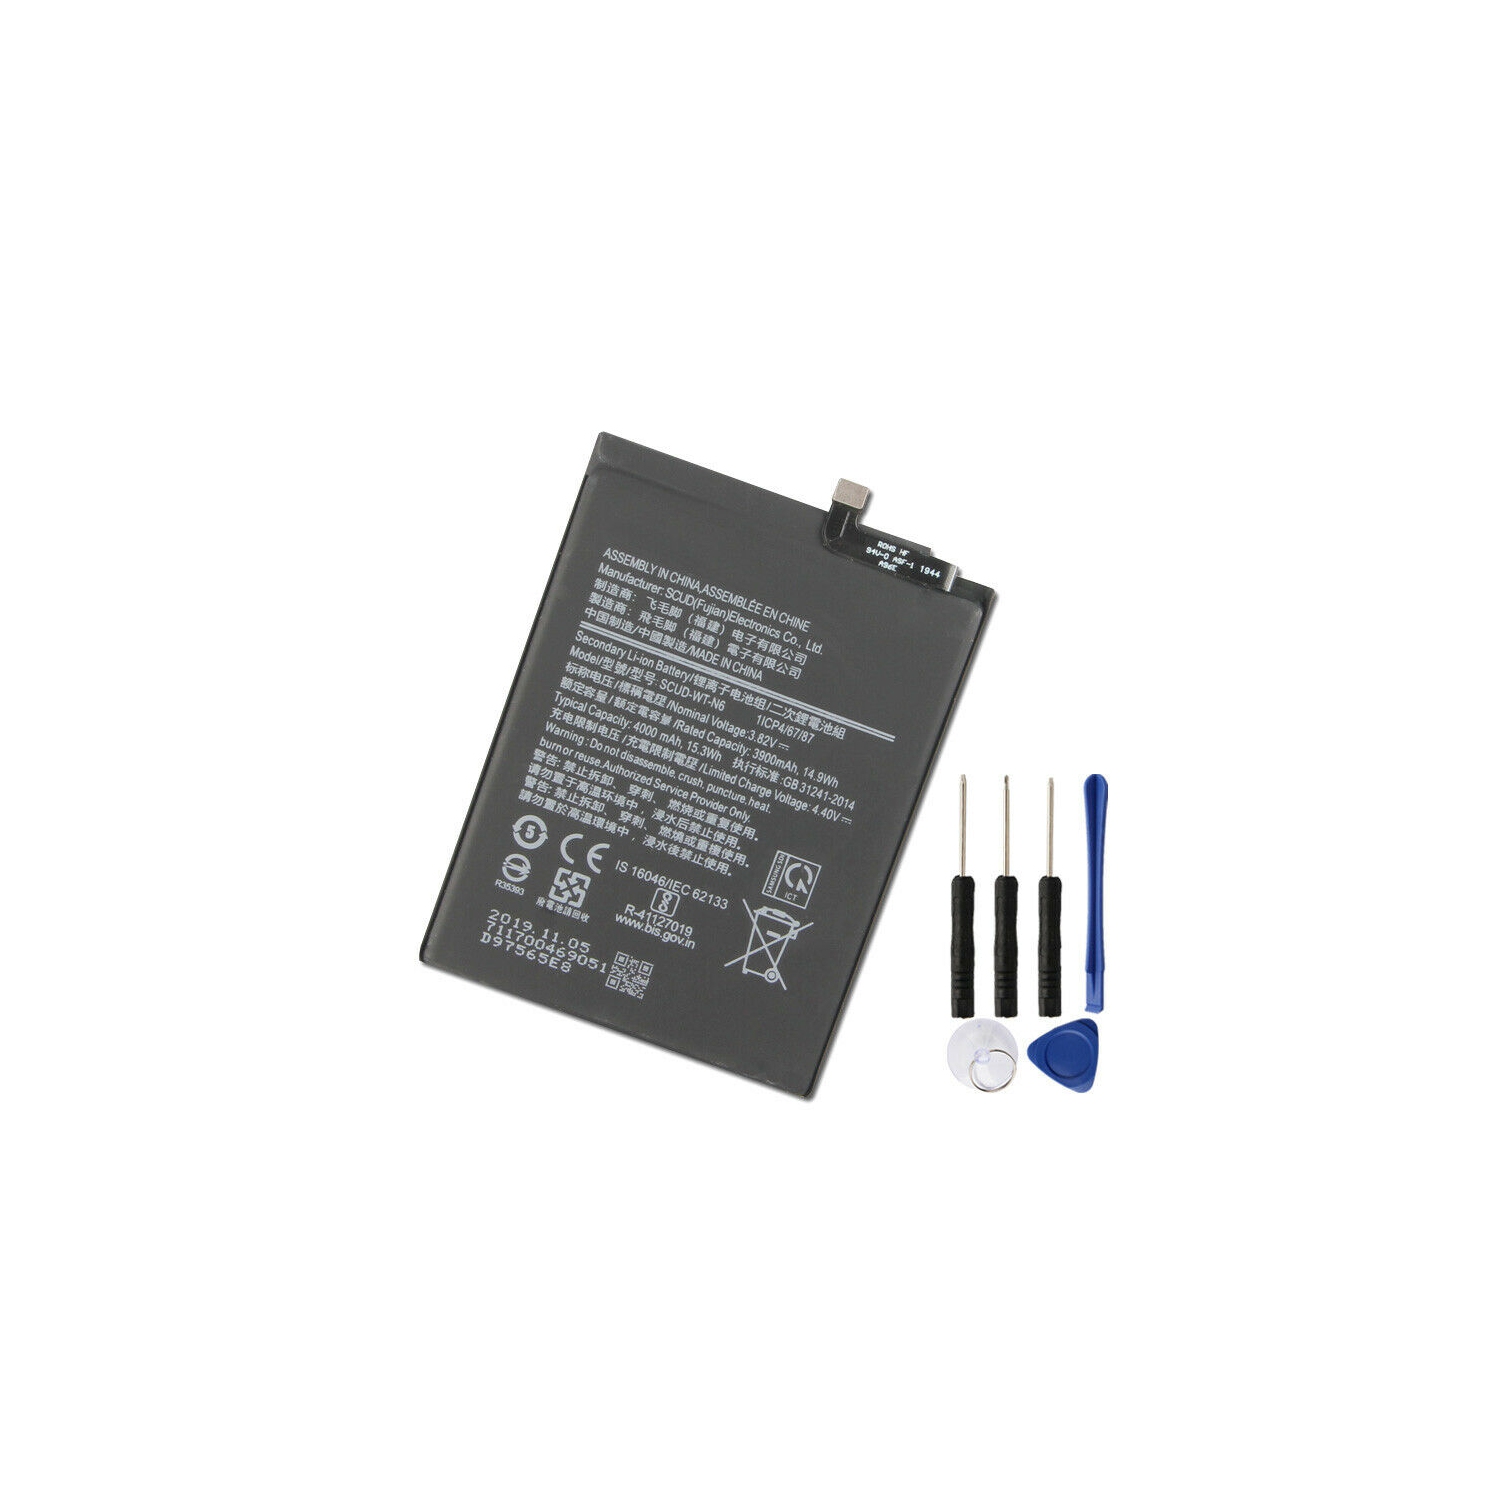 Replacement Battery for Samsung Galaxy A10s / A20s / A21, SCUD-WT-N6